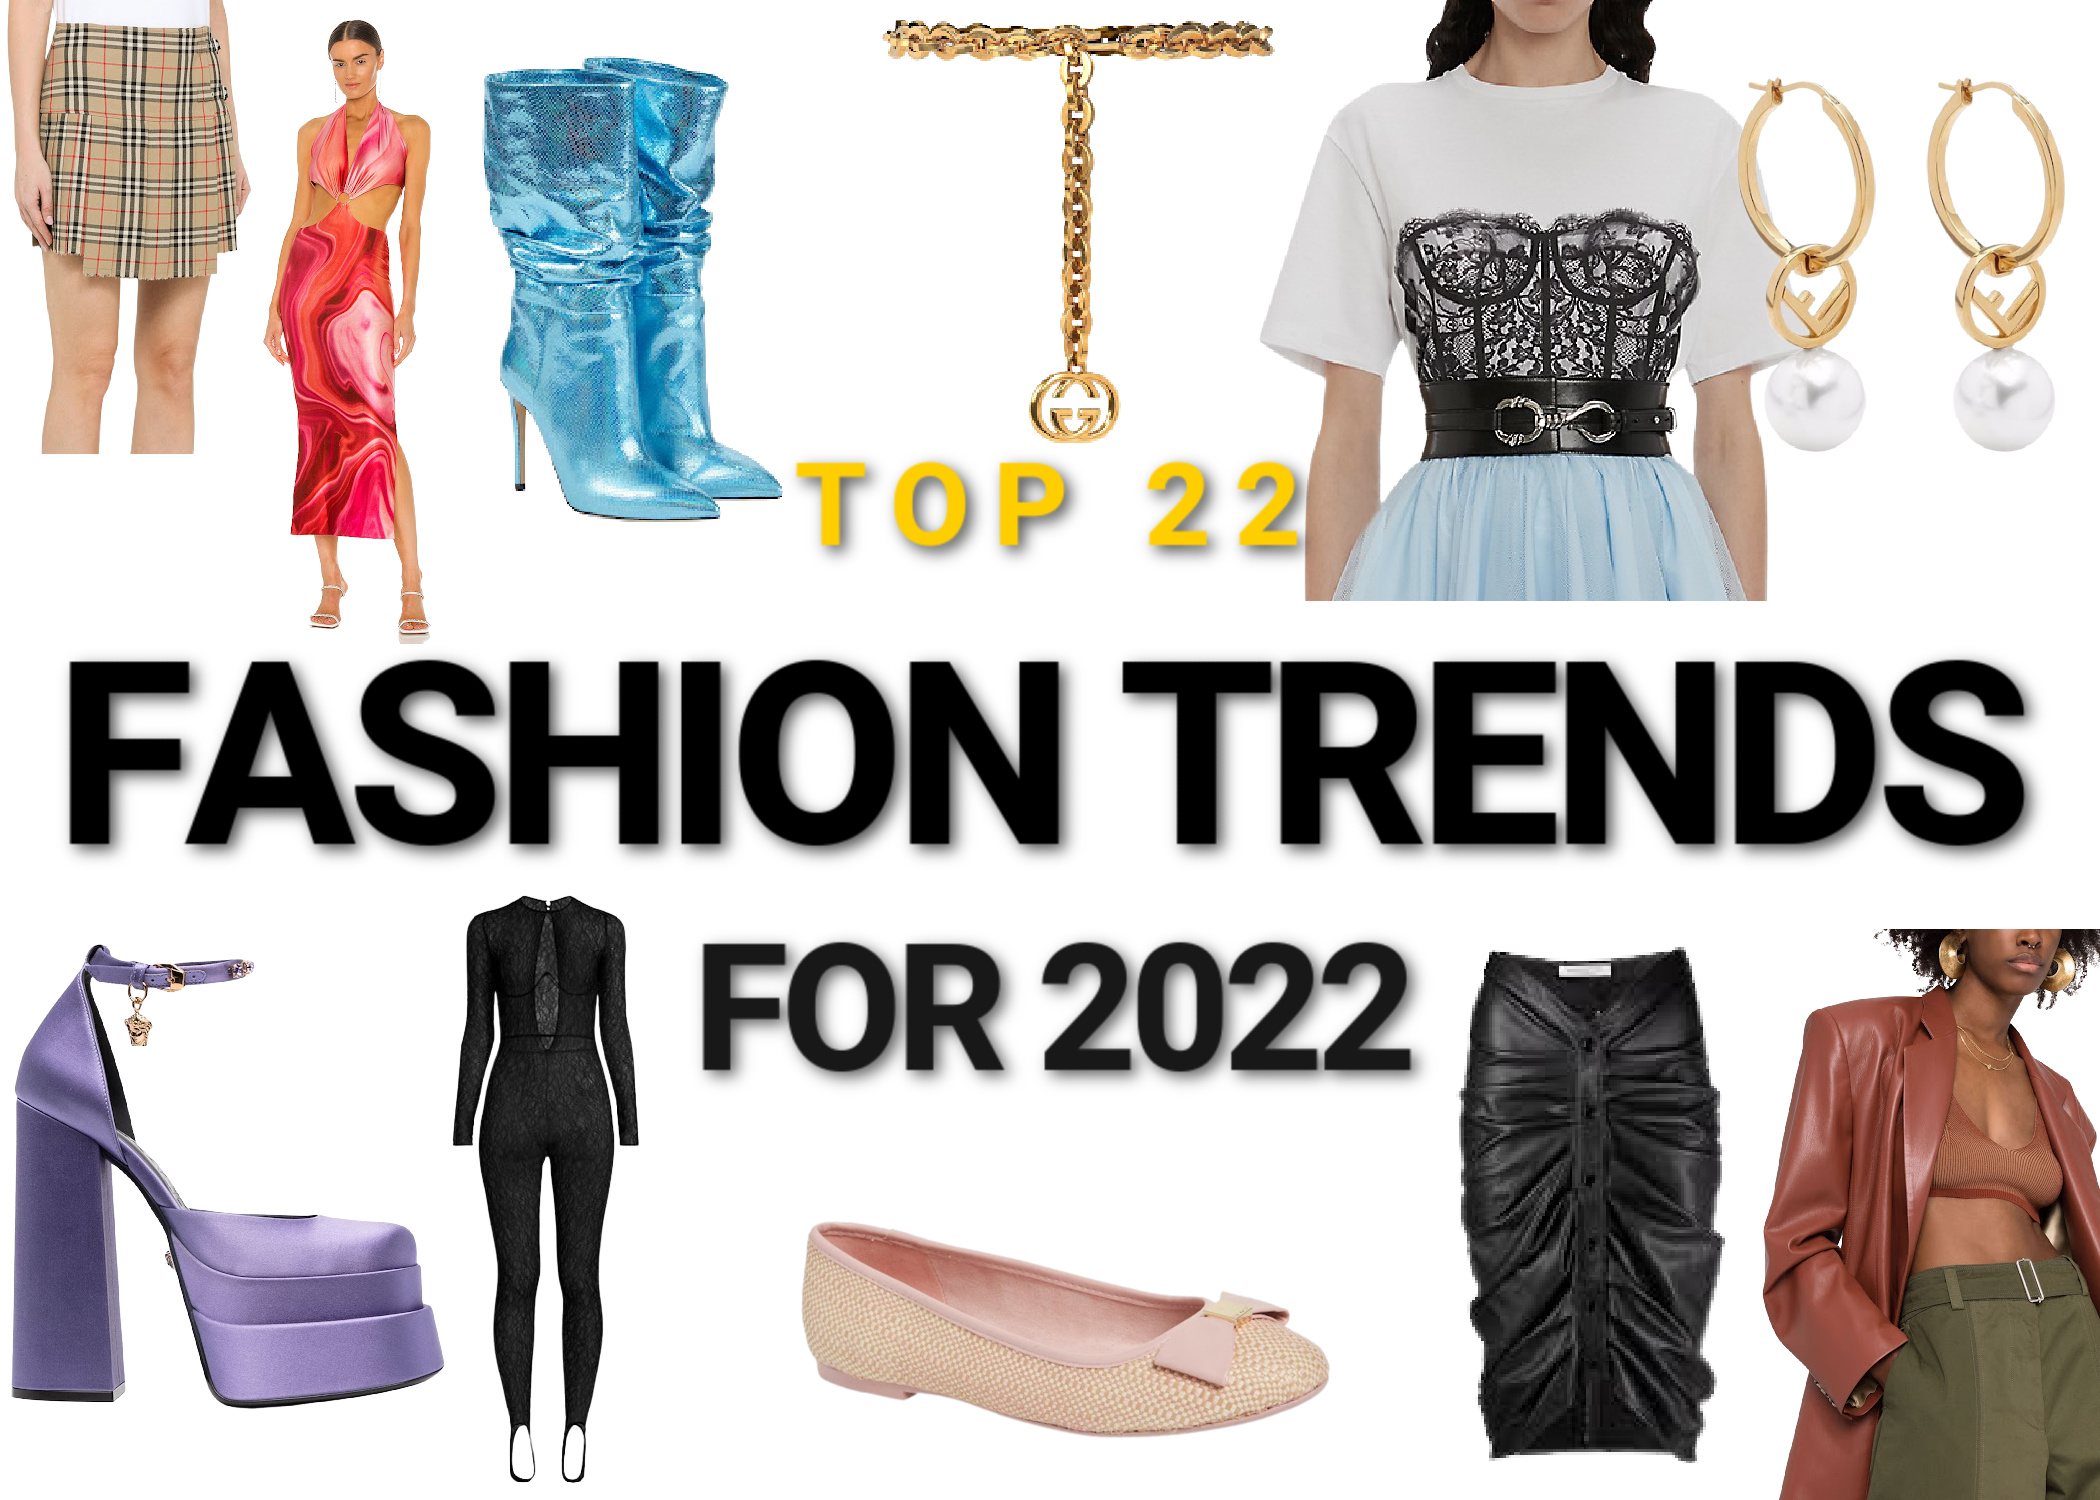 Top 22 Fashion Trends for 2022 - Domesticated Me